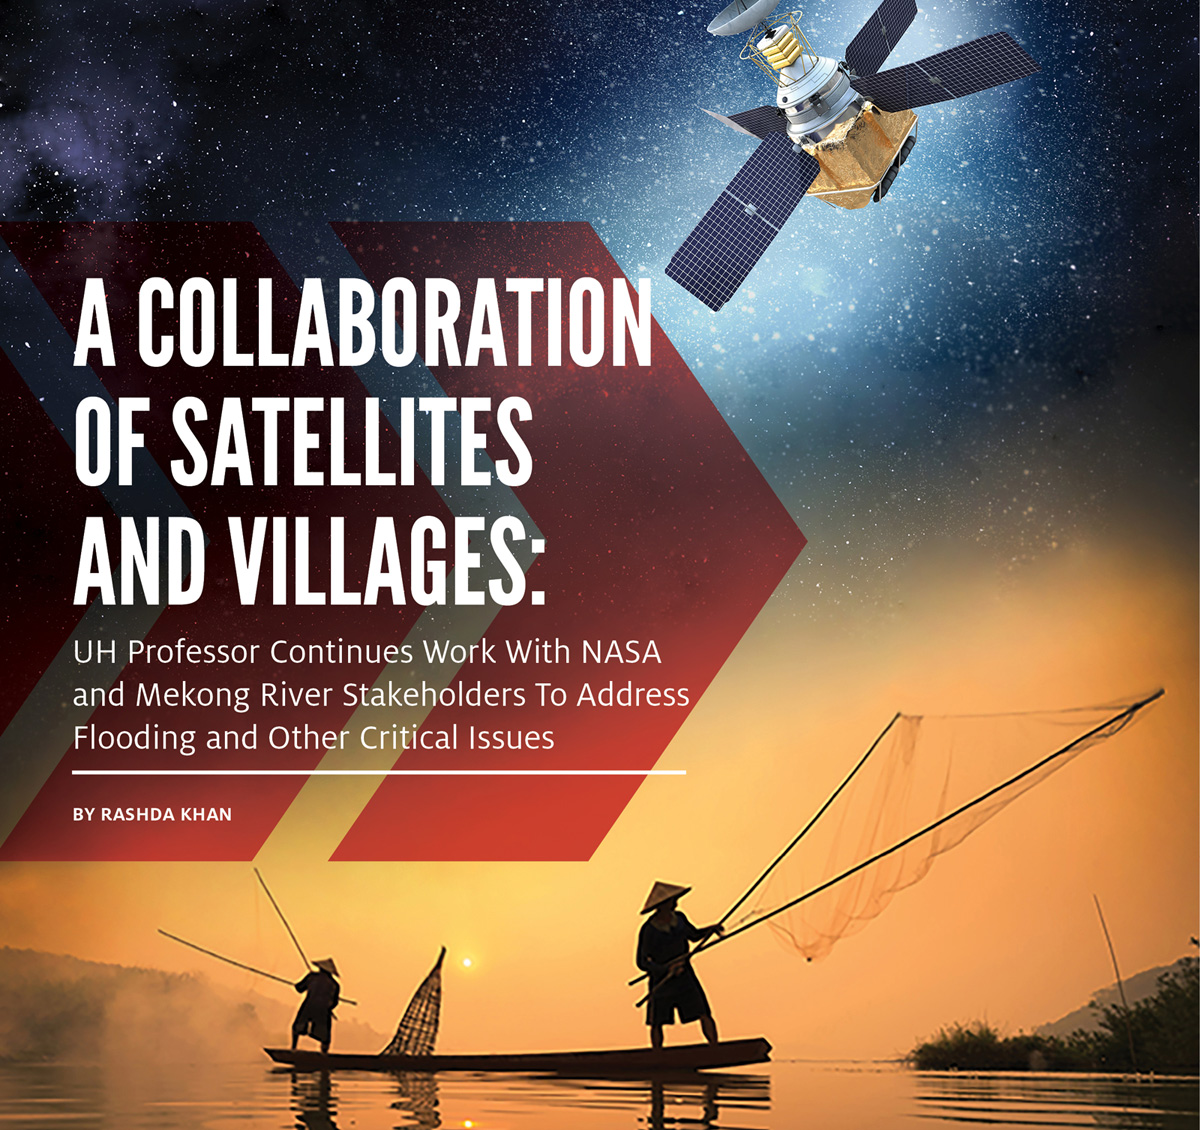 A Collaboration of Satellites and Villages